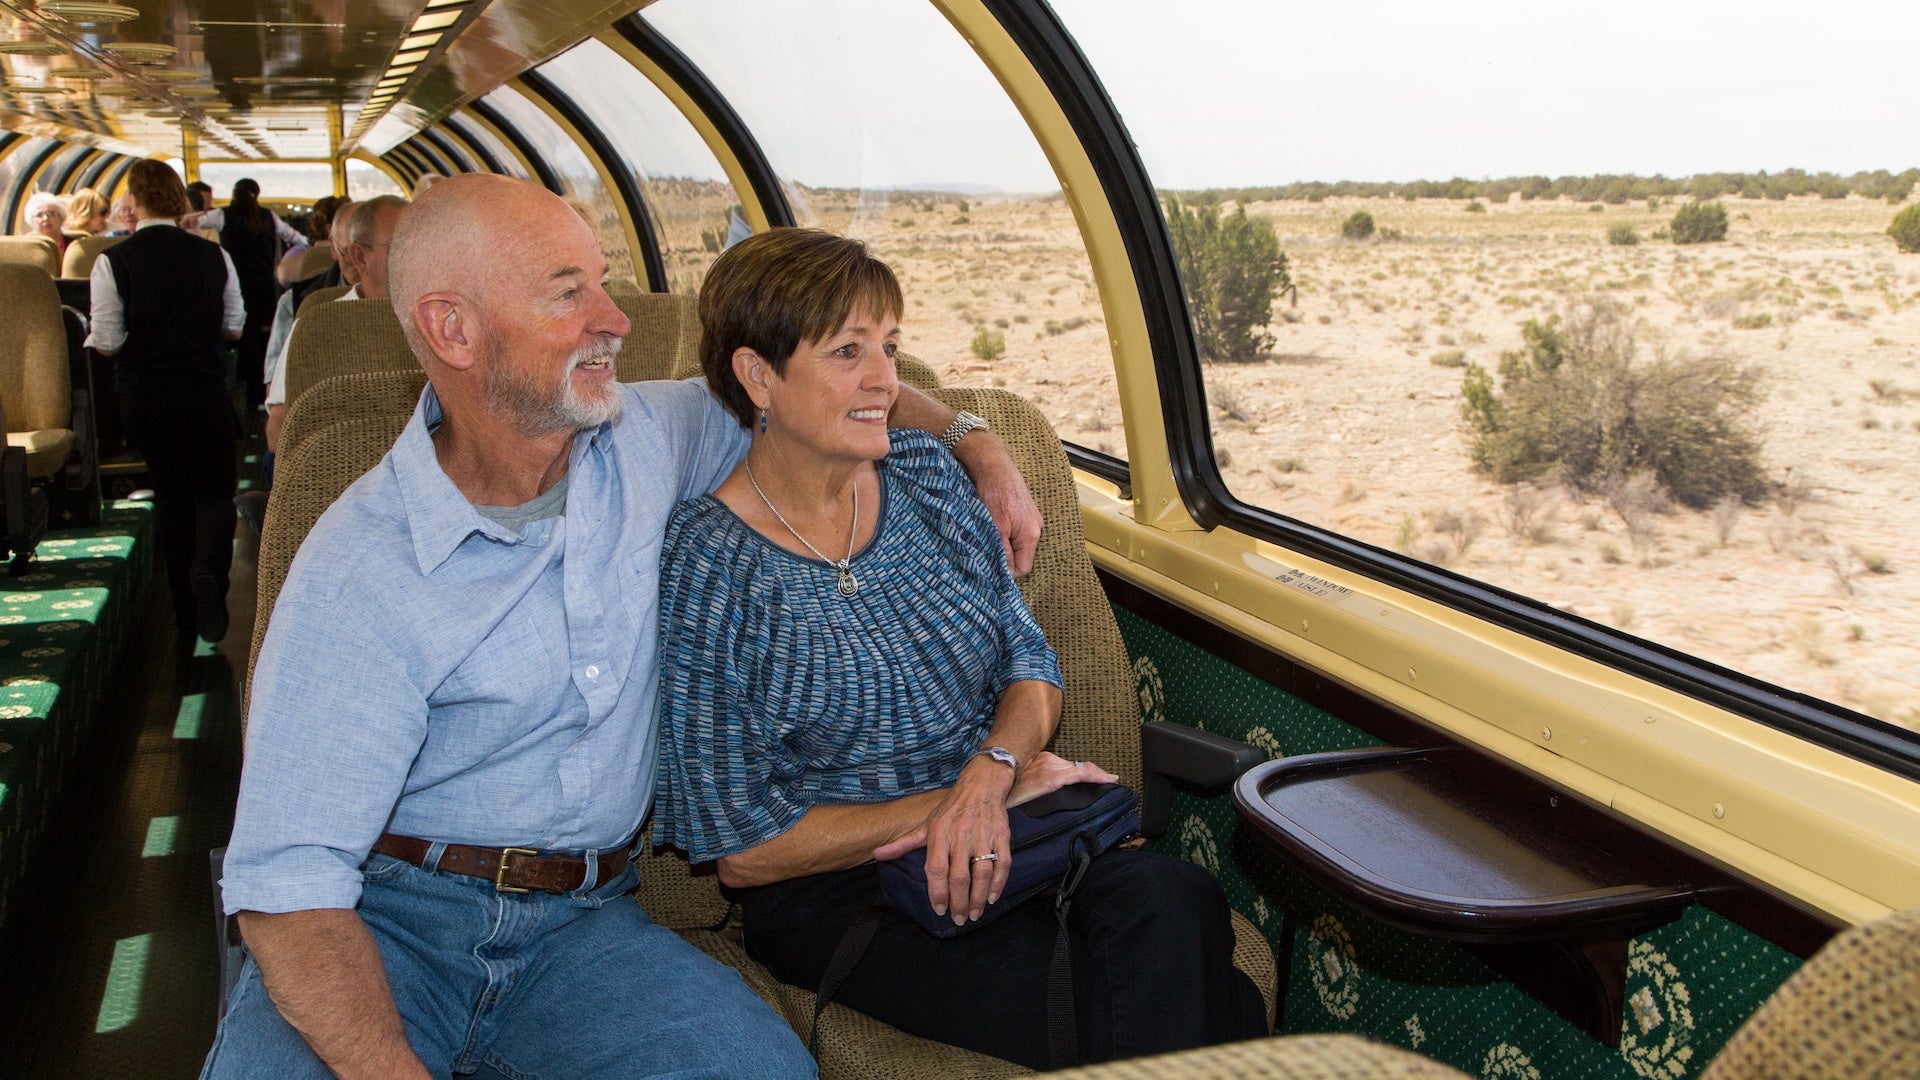 Interior view of a luxury train car with an older couple sitting on a booth looking out of large windows at the desert.